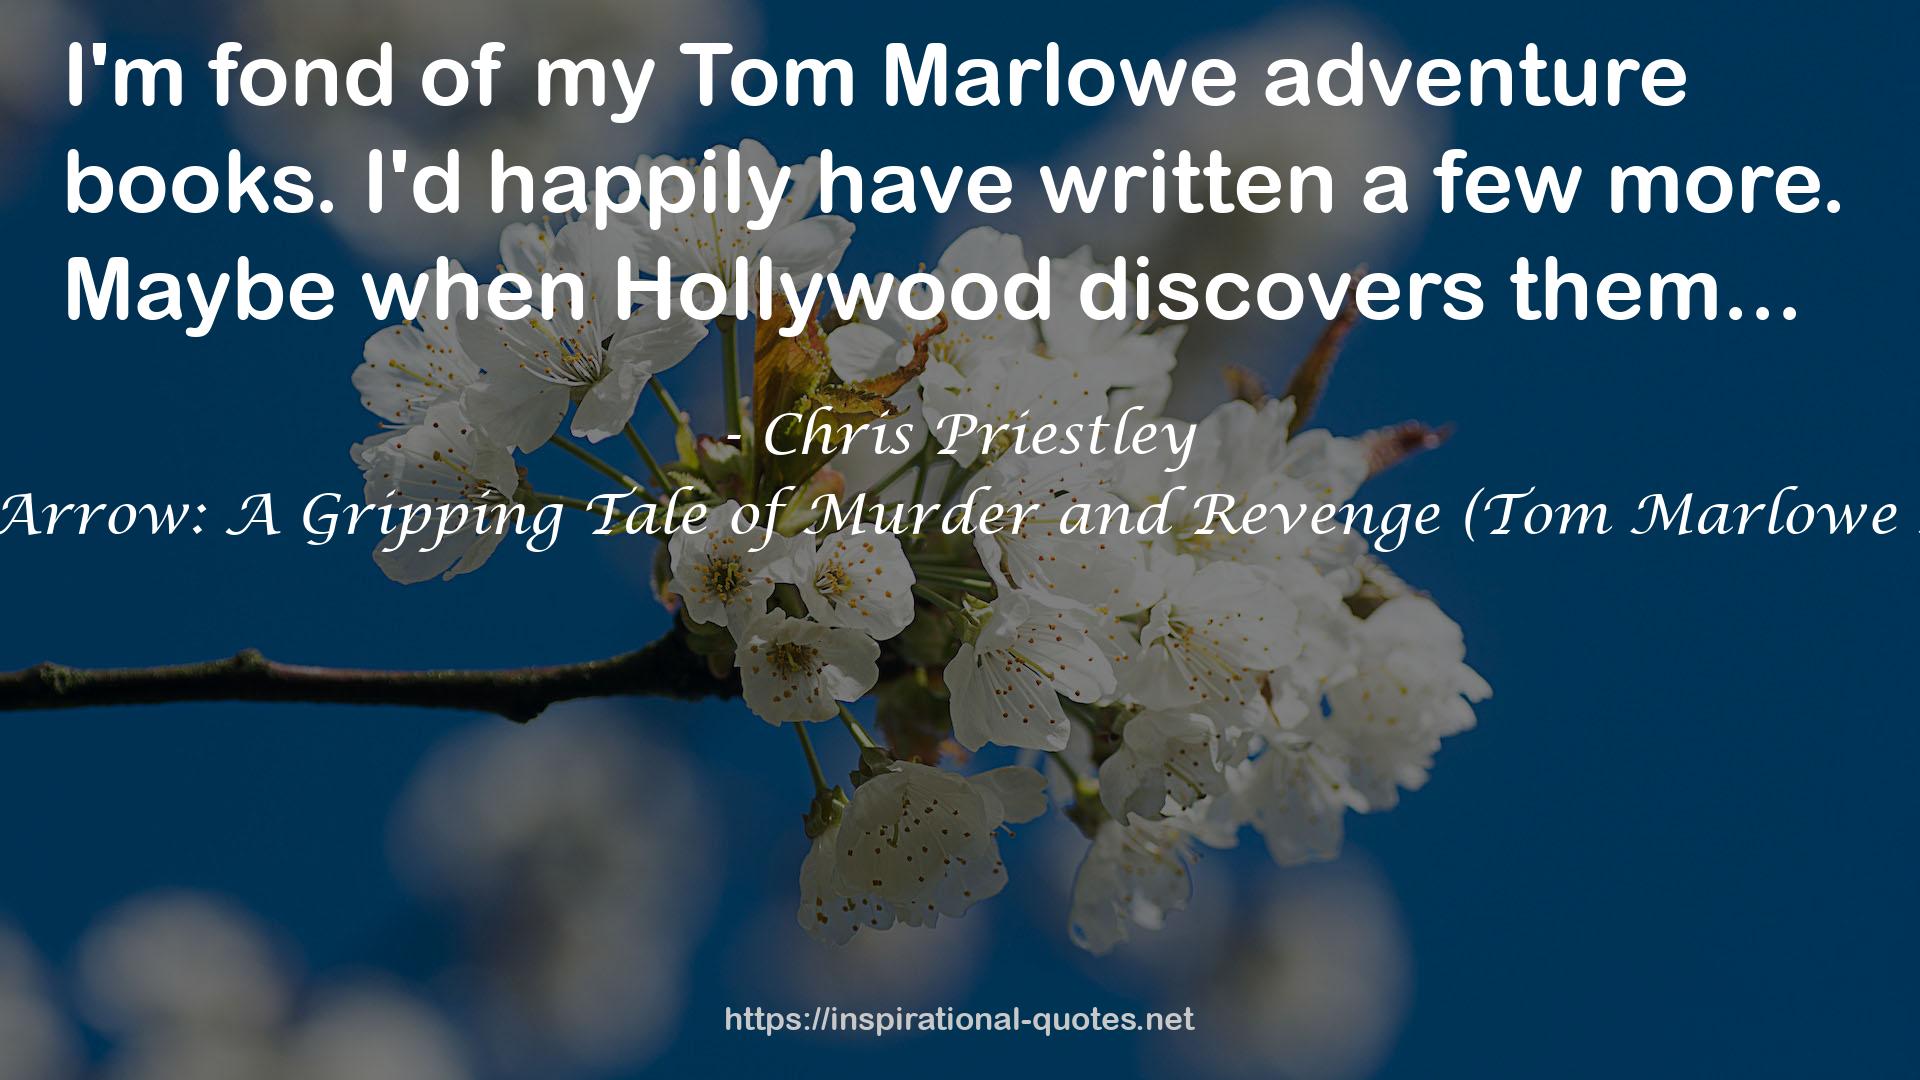 Death and the Arrow: A Gripping Tale of Murder and Revenge (Tom Marlowe Adventures, #1) QUOTES